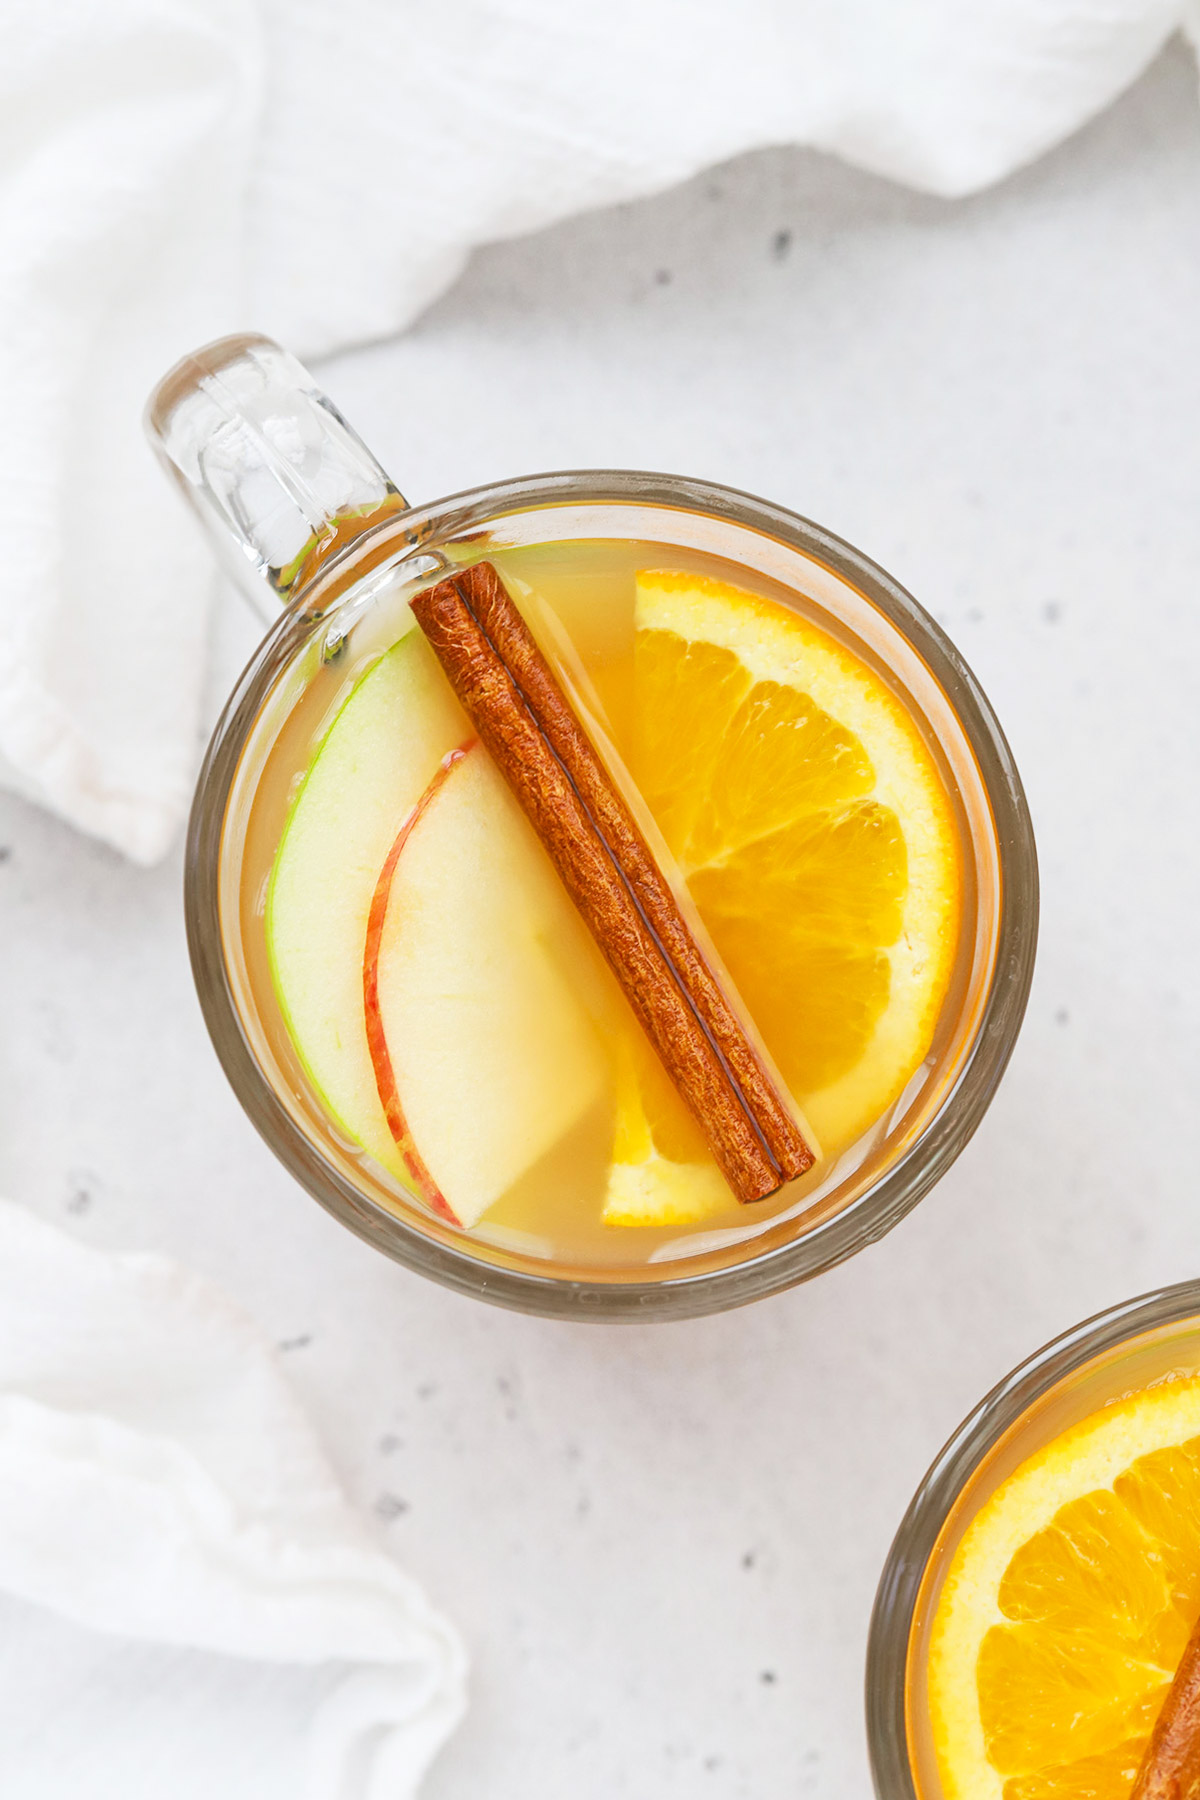 Overhead view of a glass mug of hot spiced cider garnished with apple slices, orange slices, and cinnamon sticks